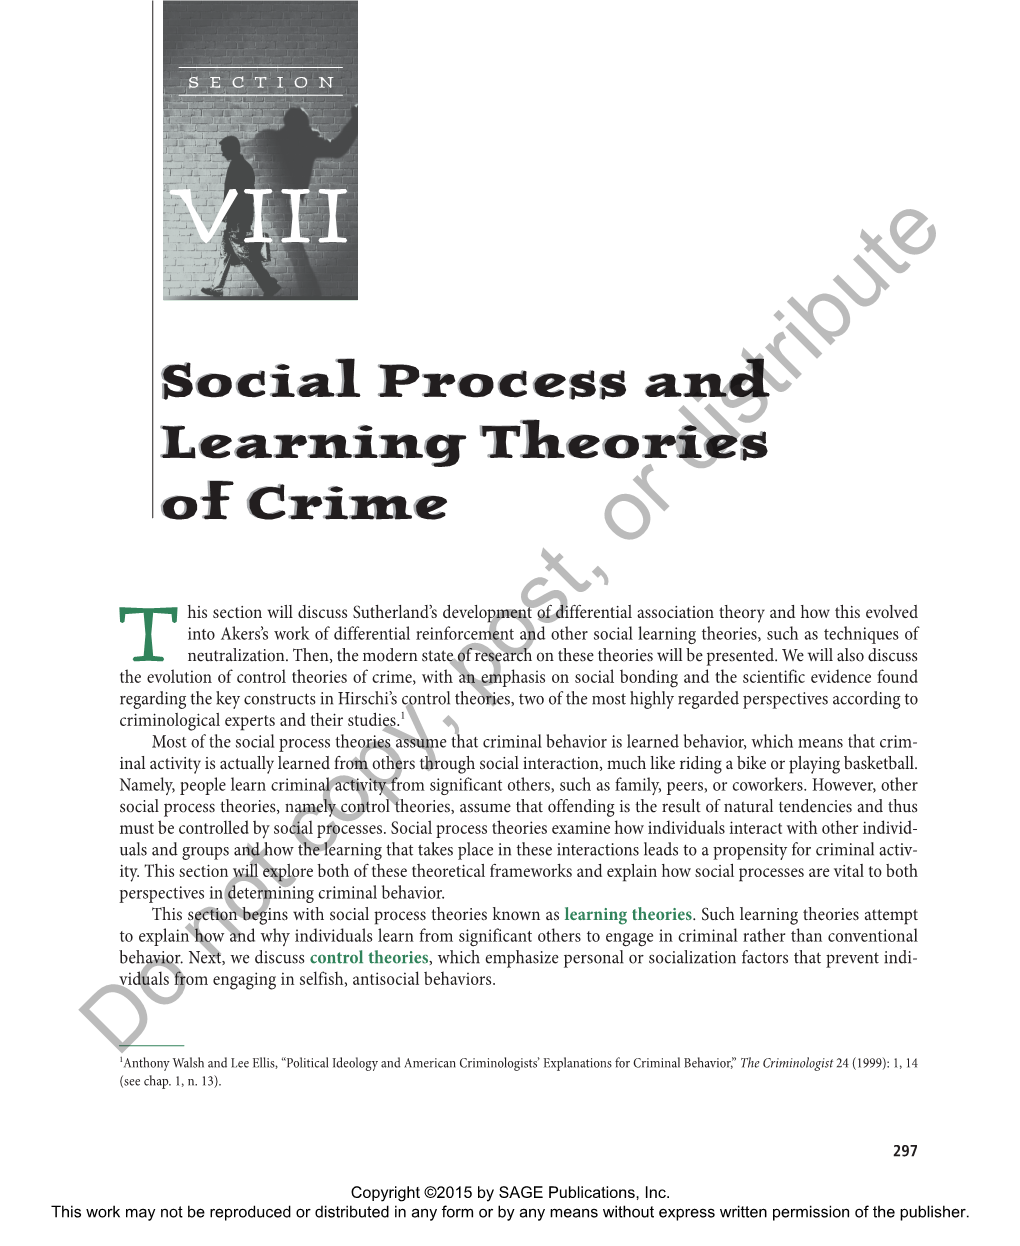 Social Process and Learning Theories of Crime 299